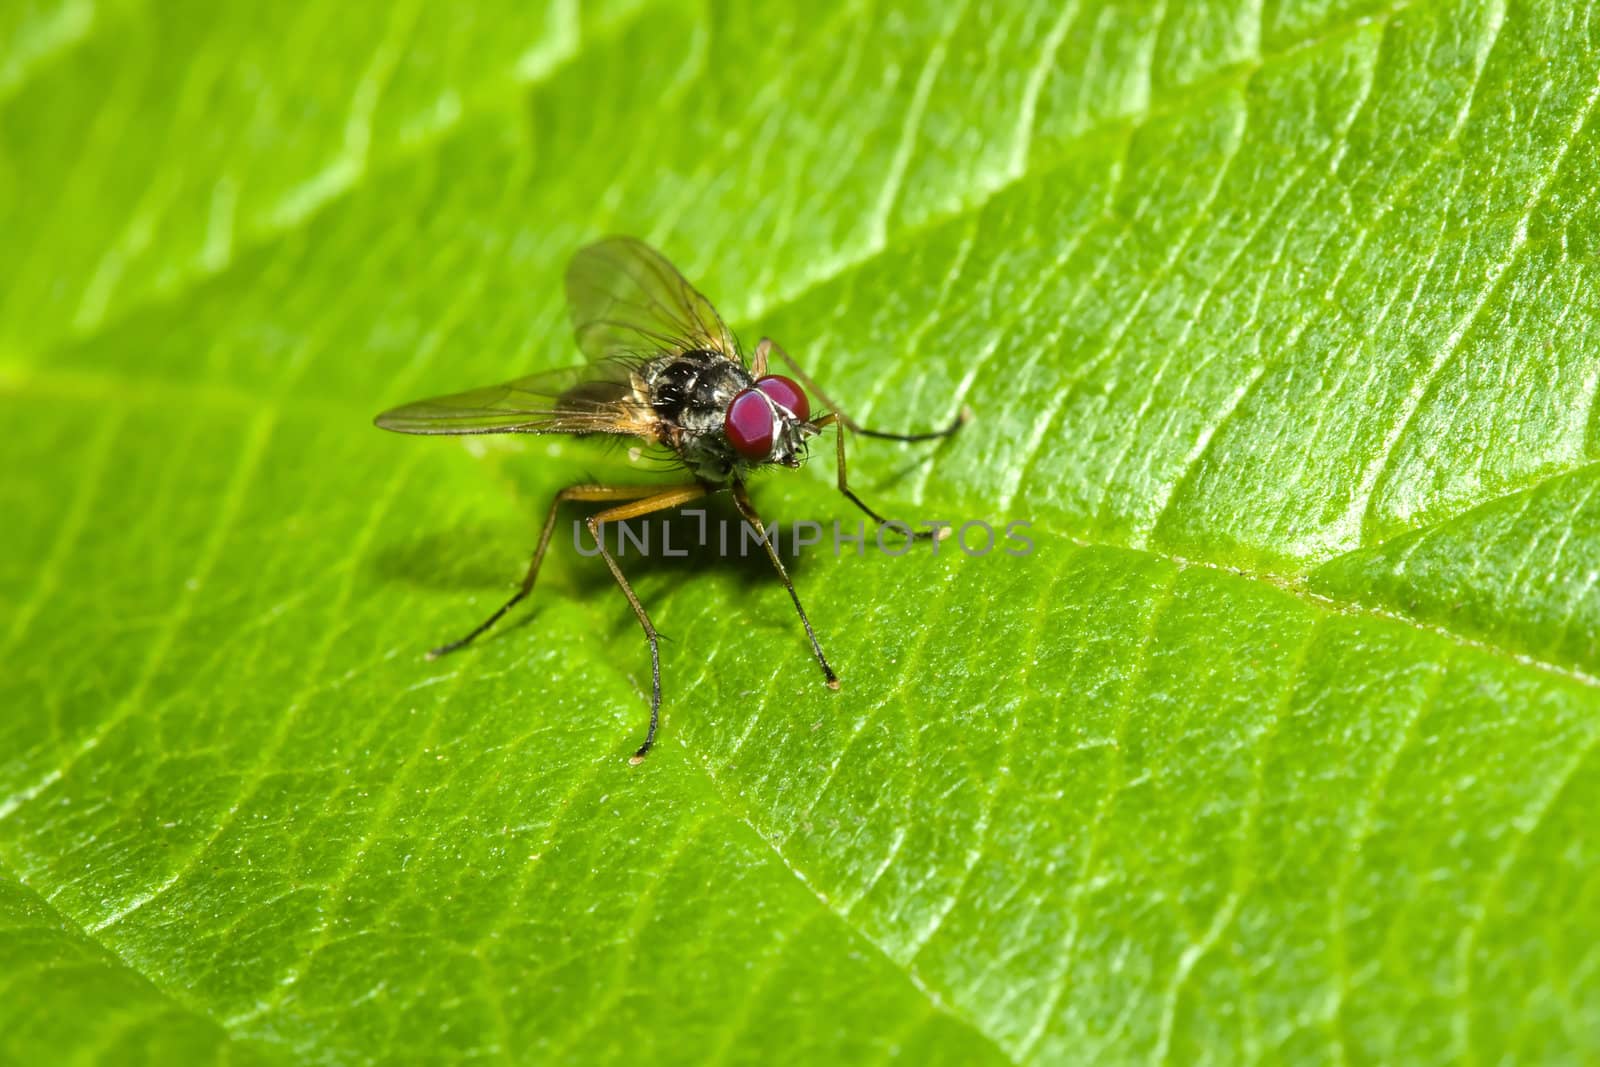 Common Fly on a Leaf by Coffee999